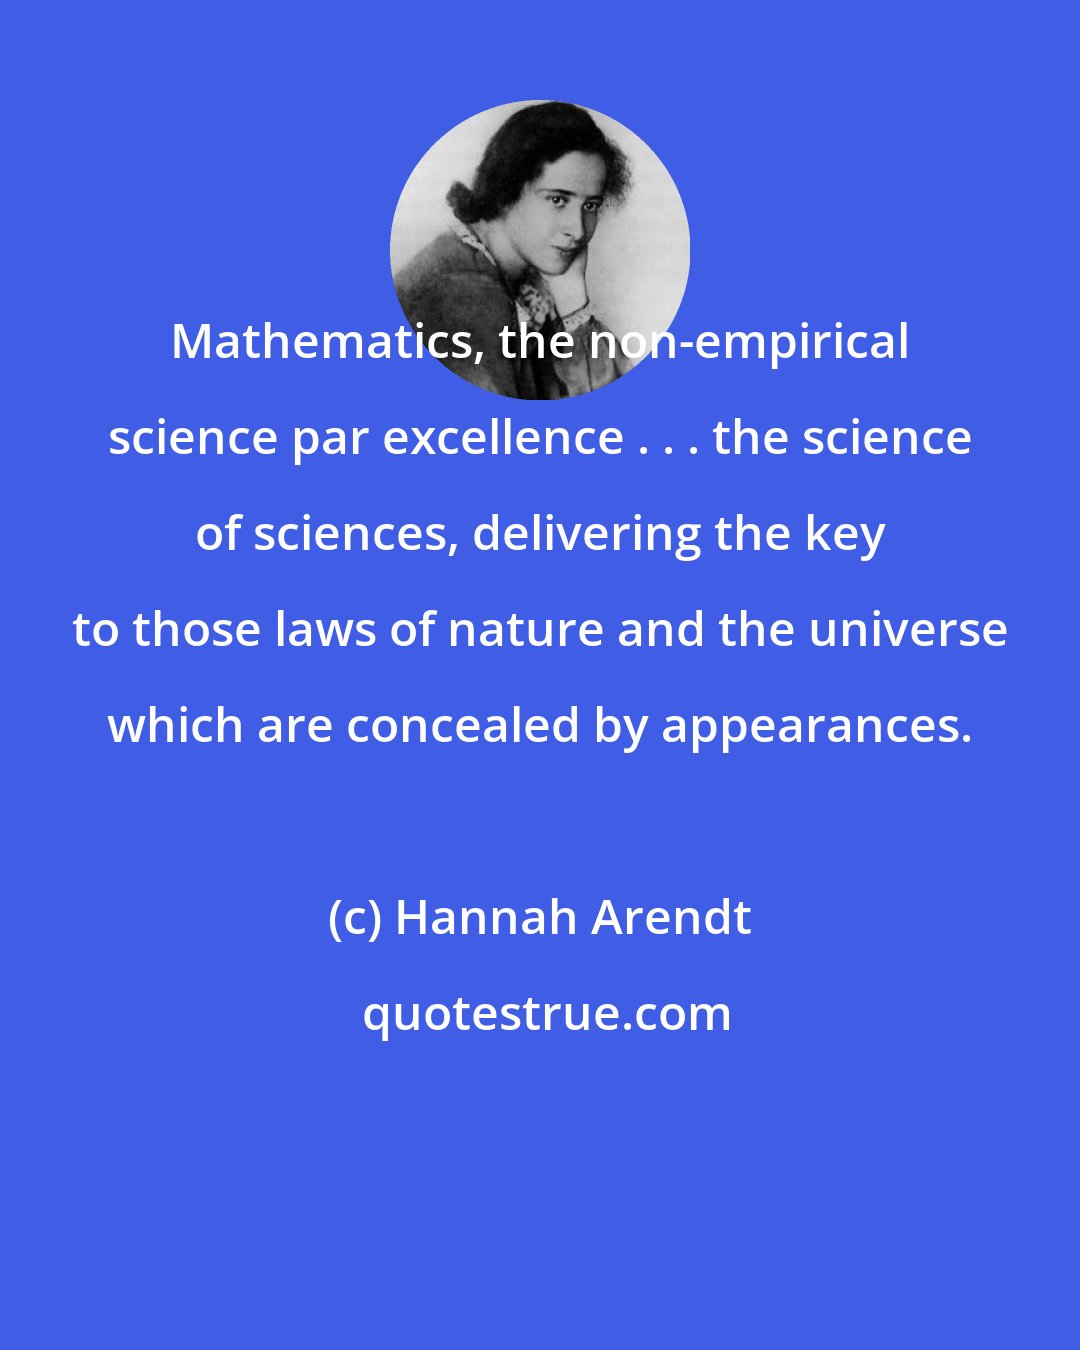 Hannah Arendt: Mathematics, the non-empirical science par excellence . . . the science of sciences, delivering the key to those laws of nature and the universe which are concealed by appearances.